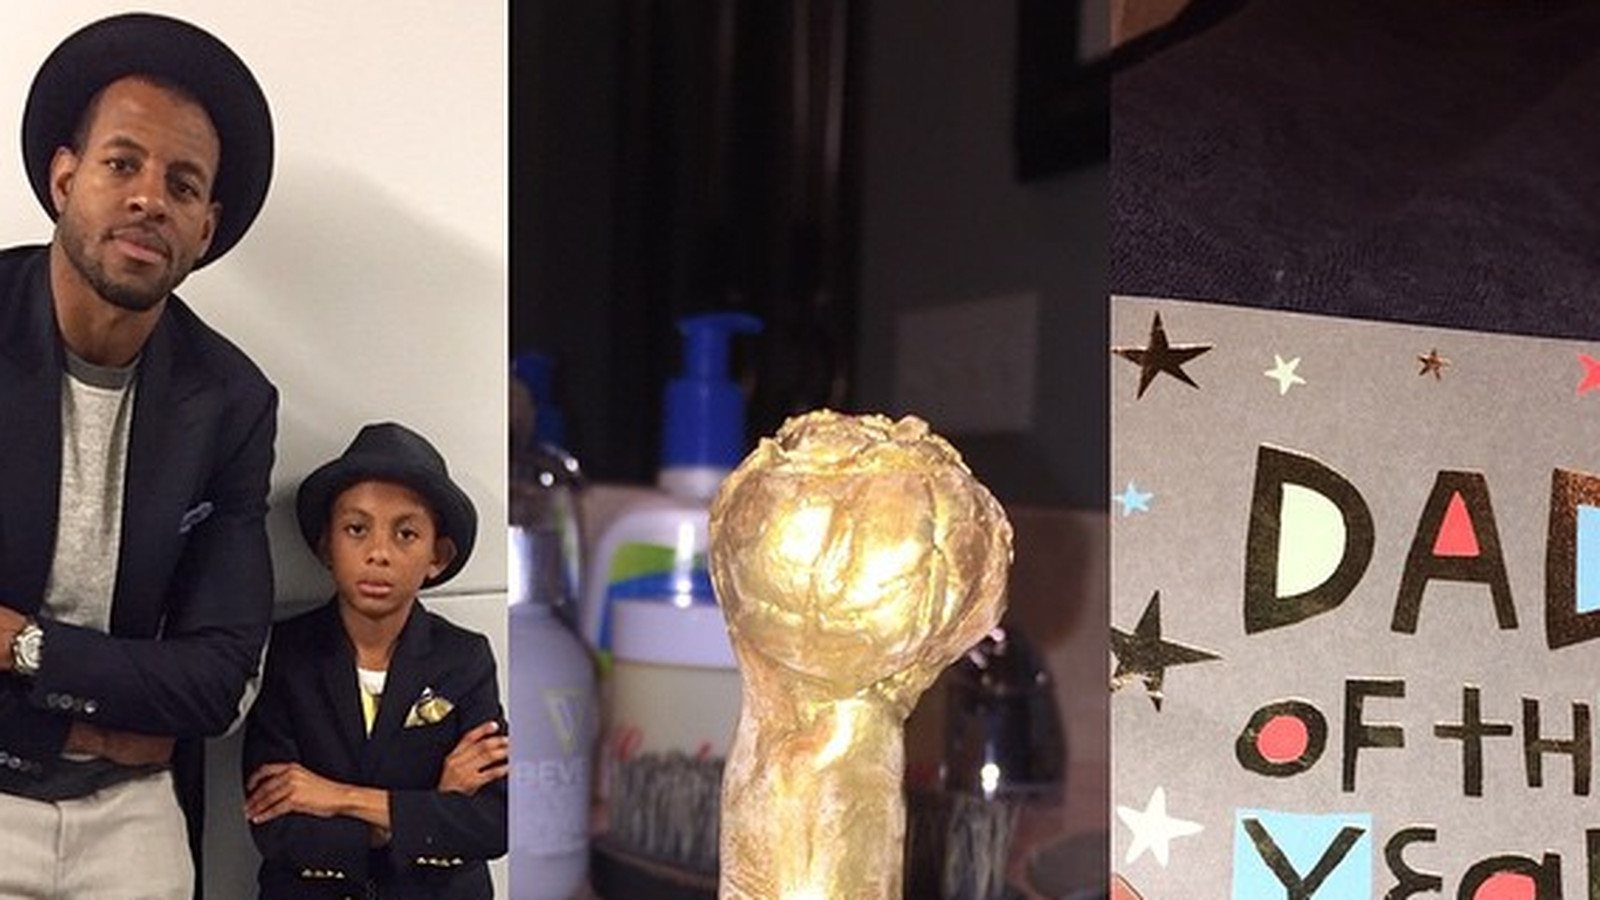 Andre Iguodala's son sculpted an NBA championship trophy in April and